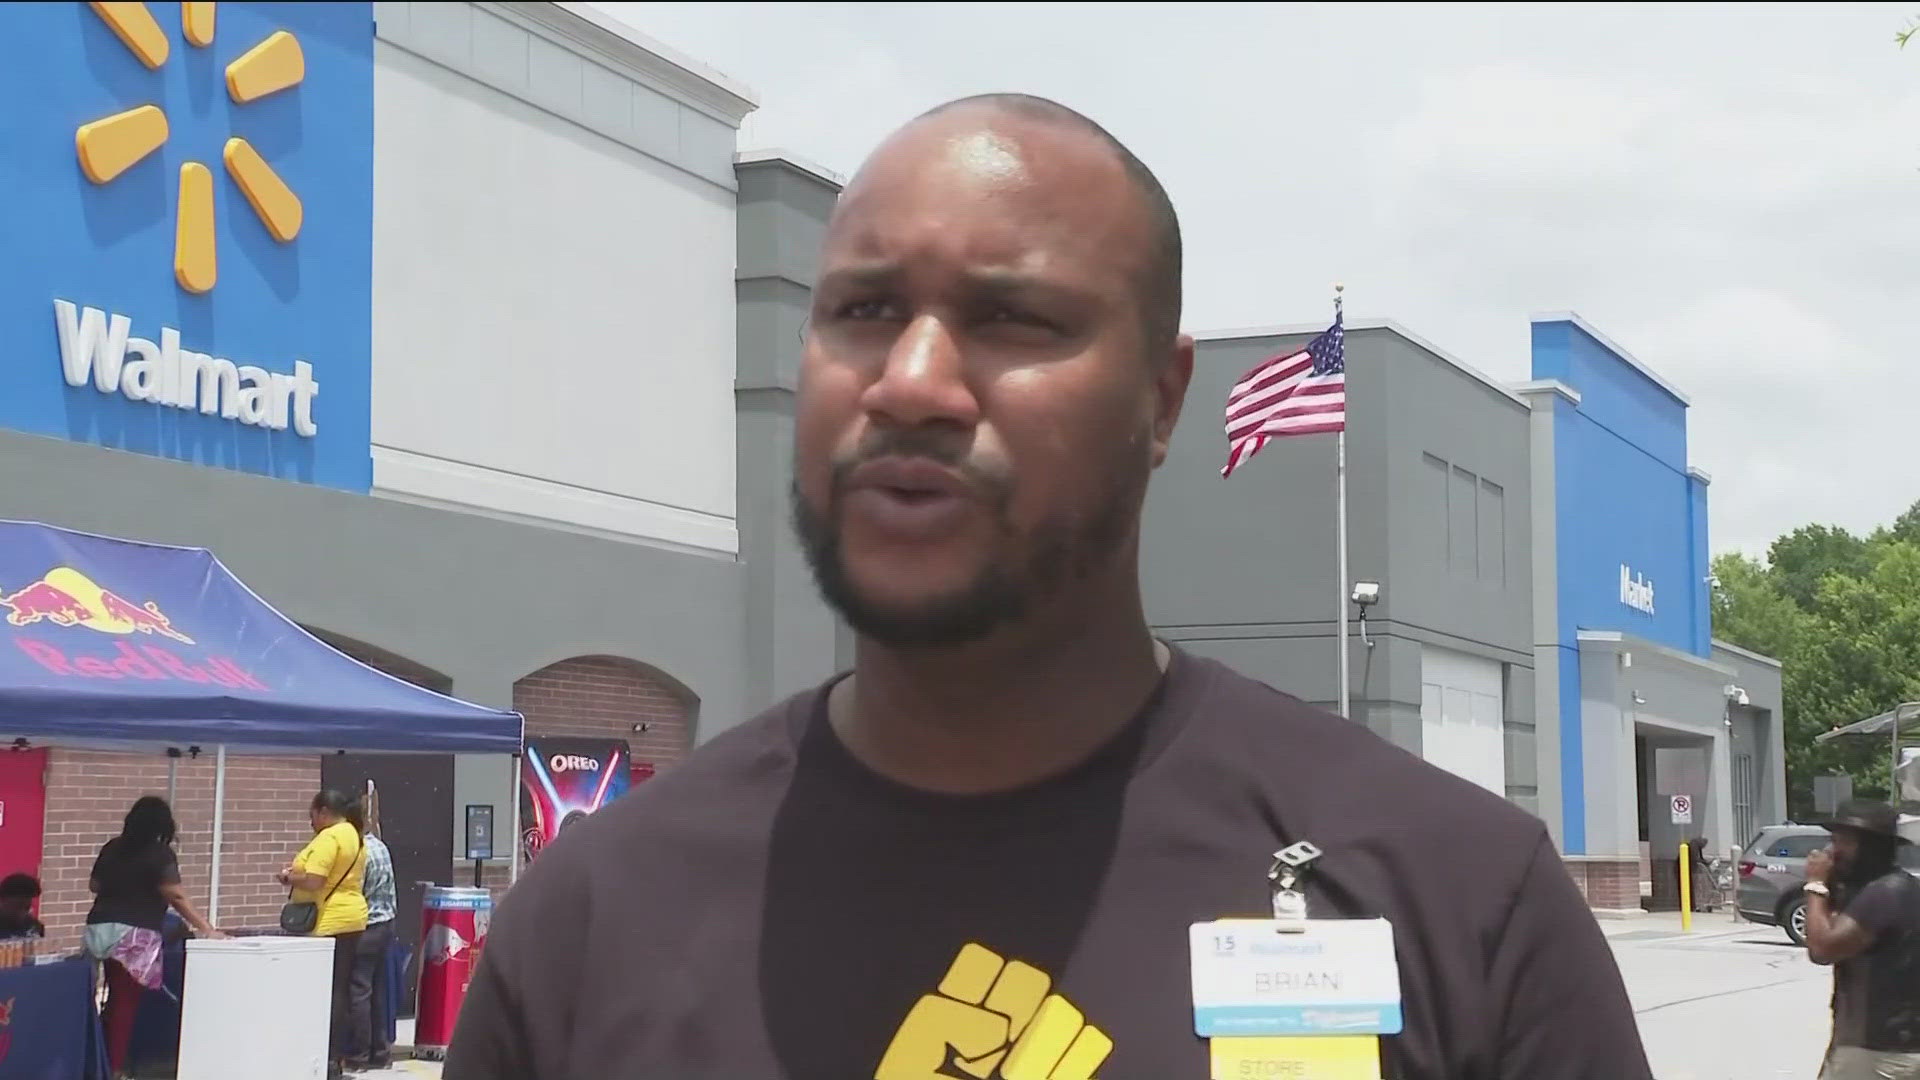 College Park's Walmart held its first Juneteenth, aka Freedom Day, celebration today.